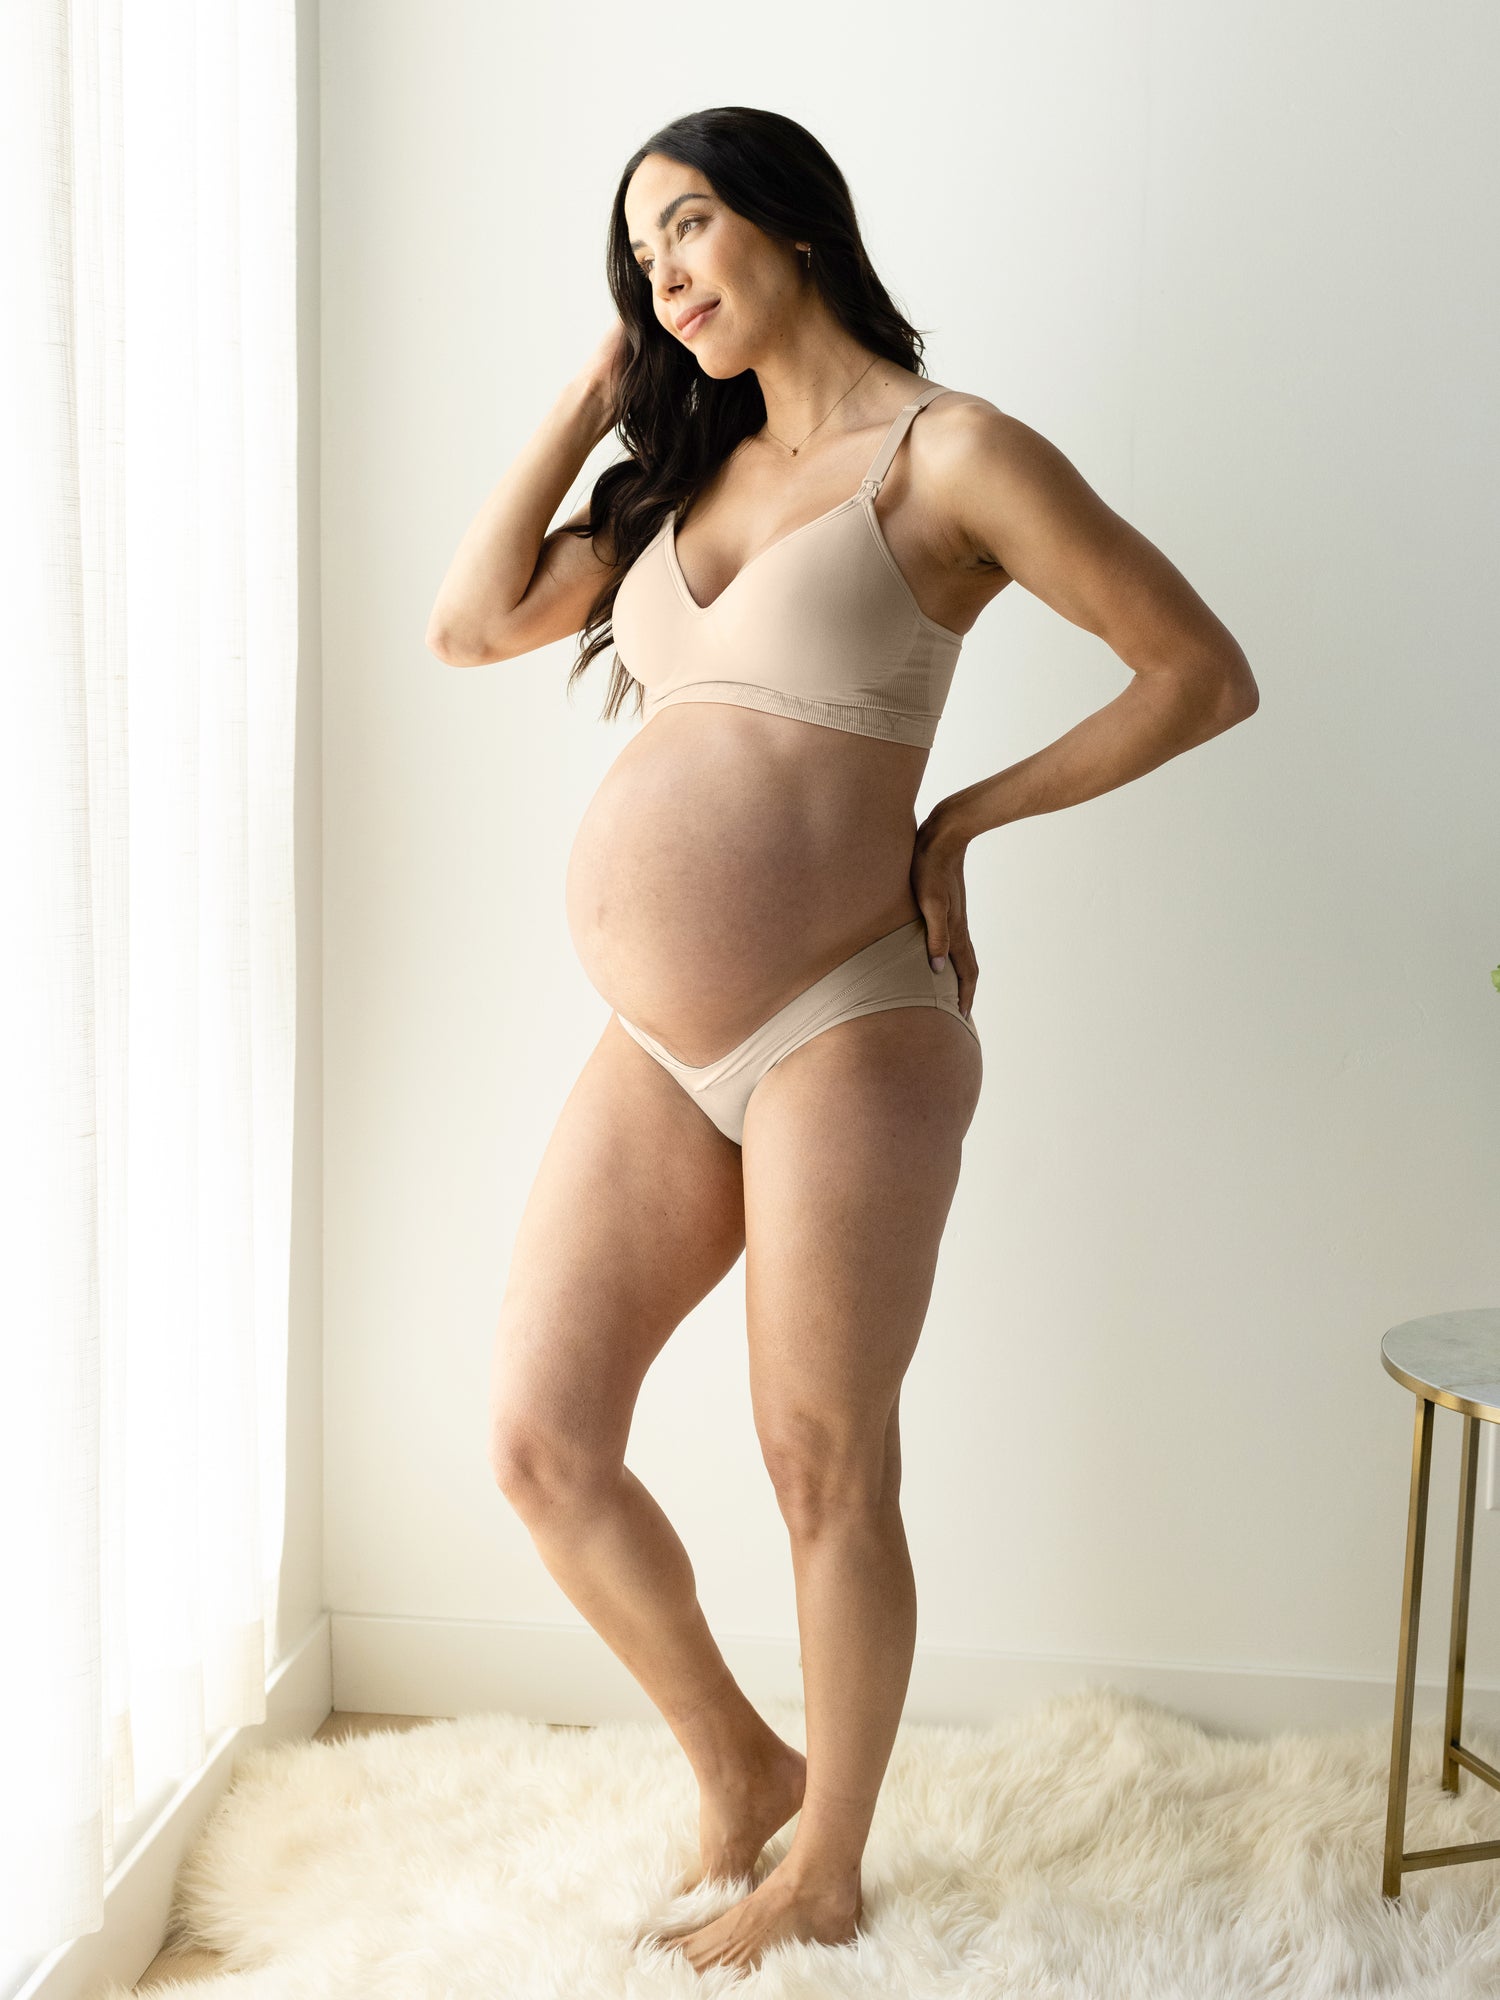 Motherhood Maternity Womens 2 Pack Postpartum Seamless Support Panty :  : Clothing, Shoes & Accessories